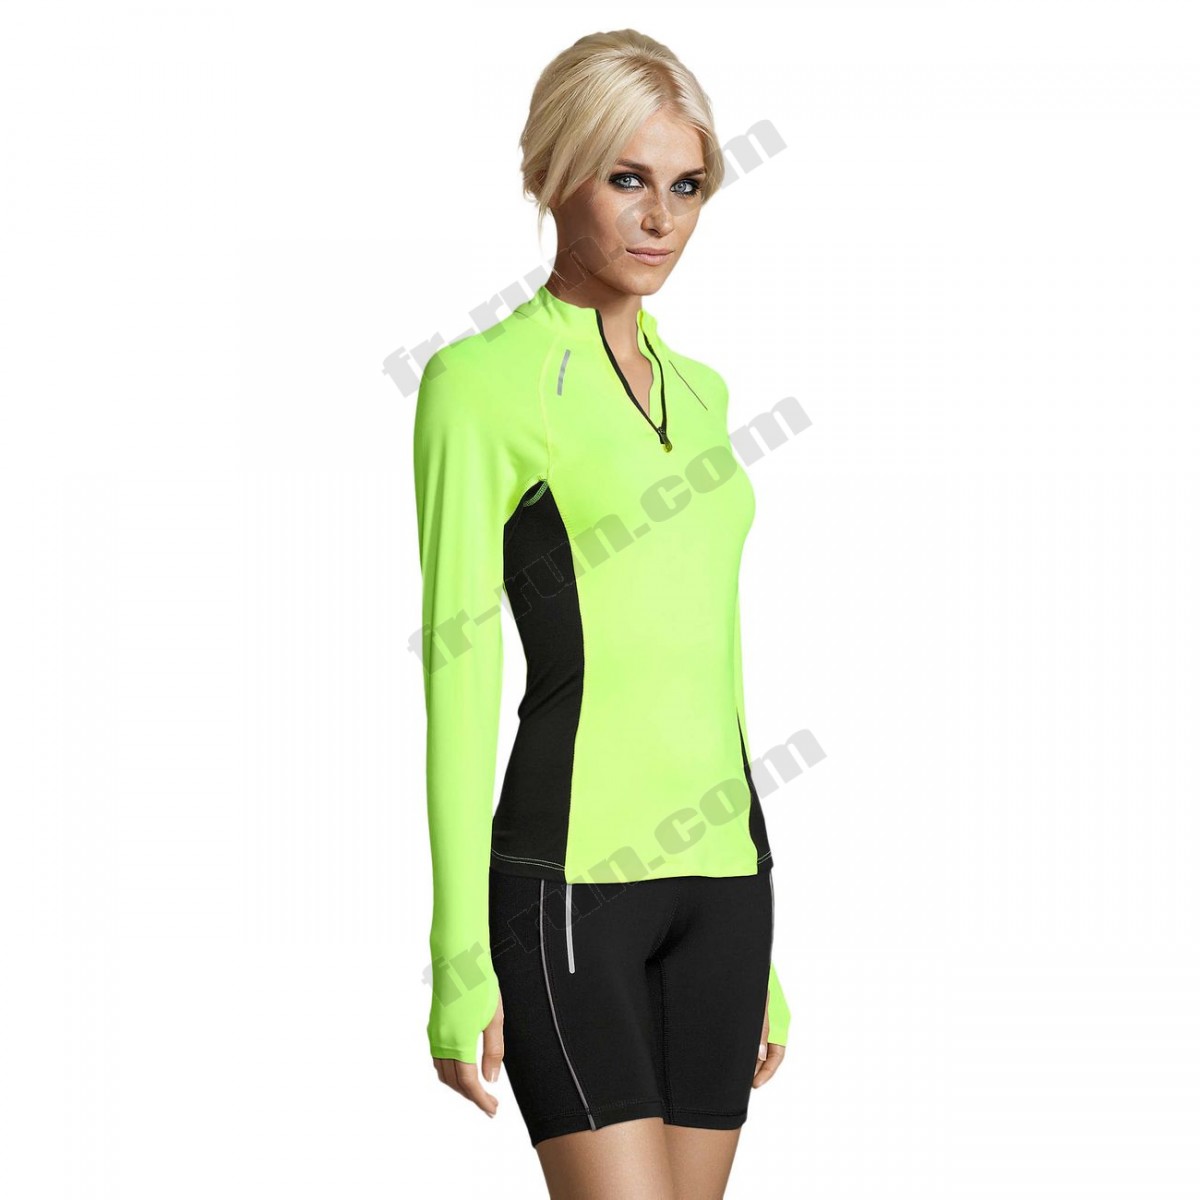 Sol's/running femme SOL'S t-shirt running manches longues - Femme - 01417 - jaune fluo √ Nouveau style √ Soldes - -2